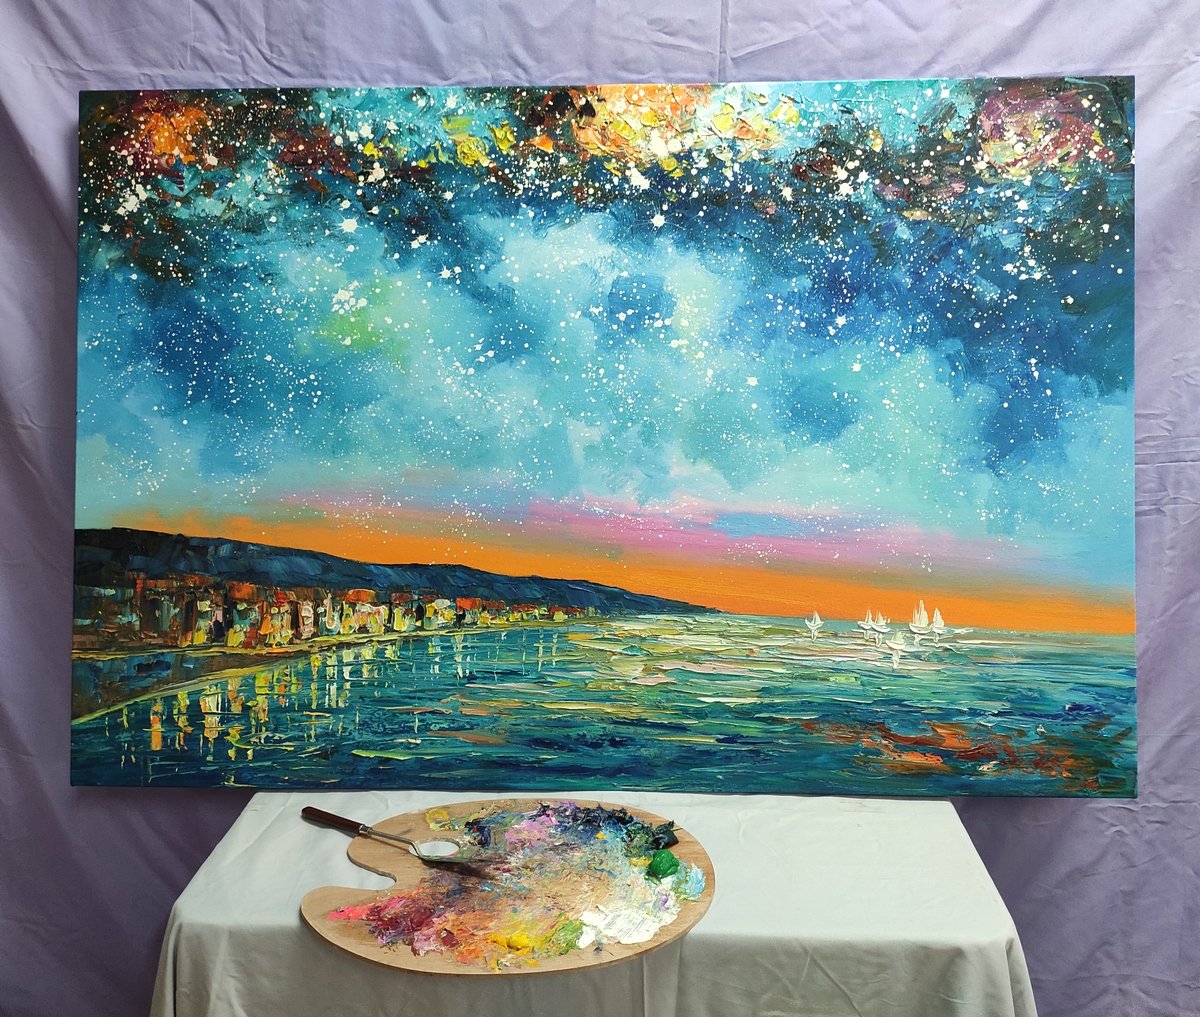 Landscape Canvas Paintings, Starry Night Sky Painting, Buy Paintings Online, Landscape Painting for Living Room, Original Painting on Canvas